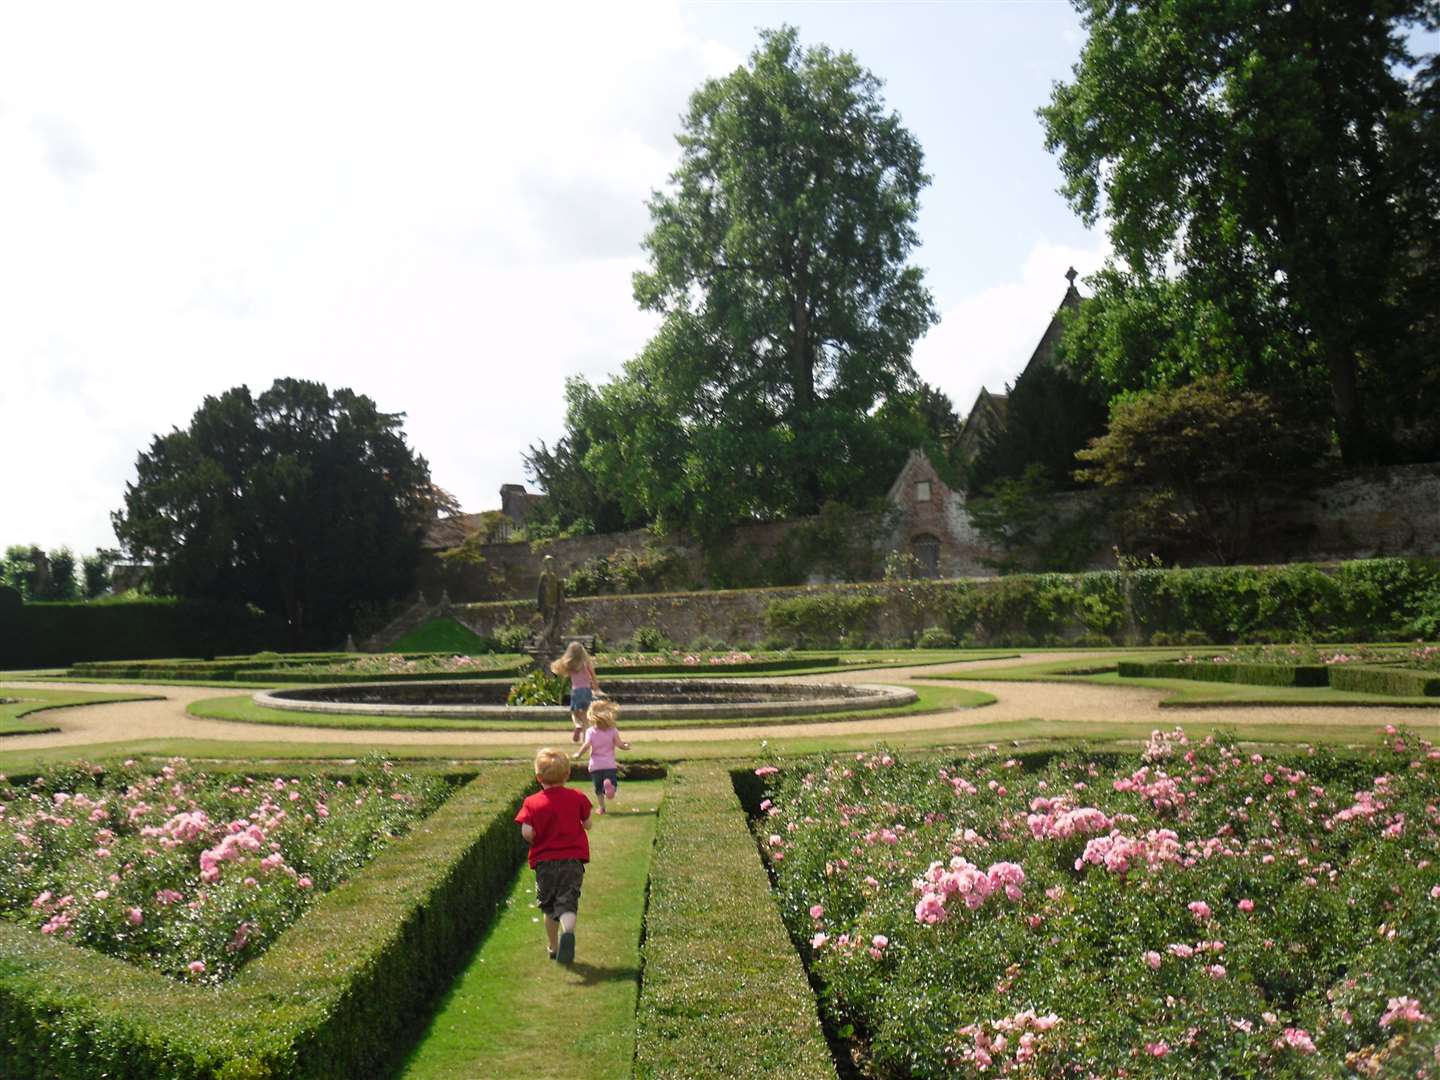 Explore the royal trail and the pretty peonies, both at Penshurst Place this half term. Picture: Penshurst Place and Gardens